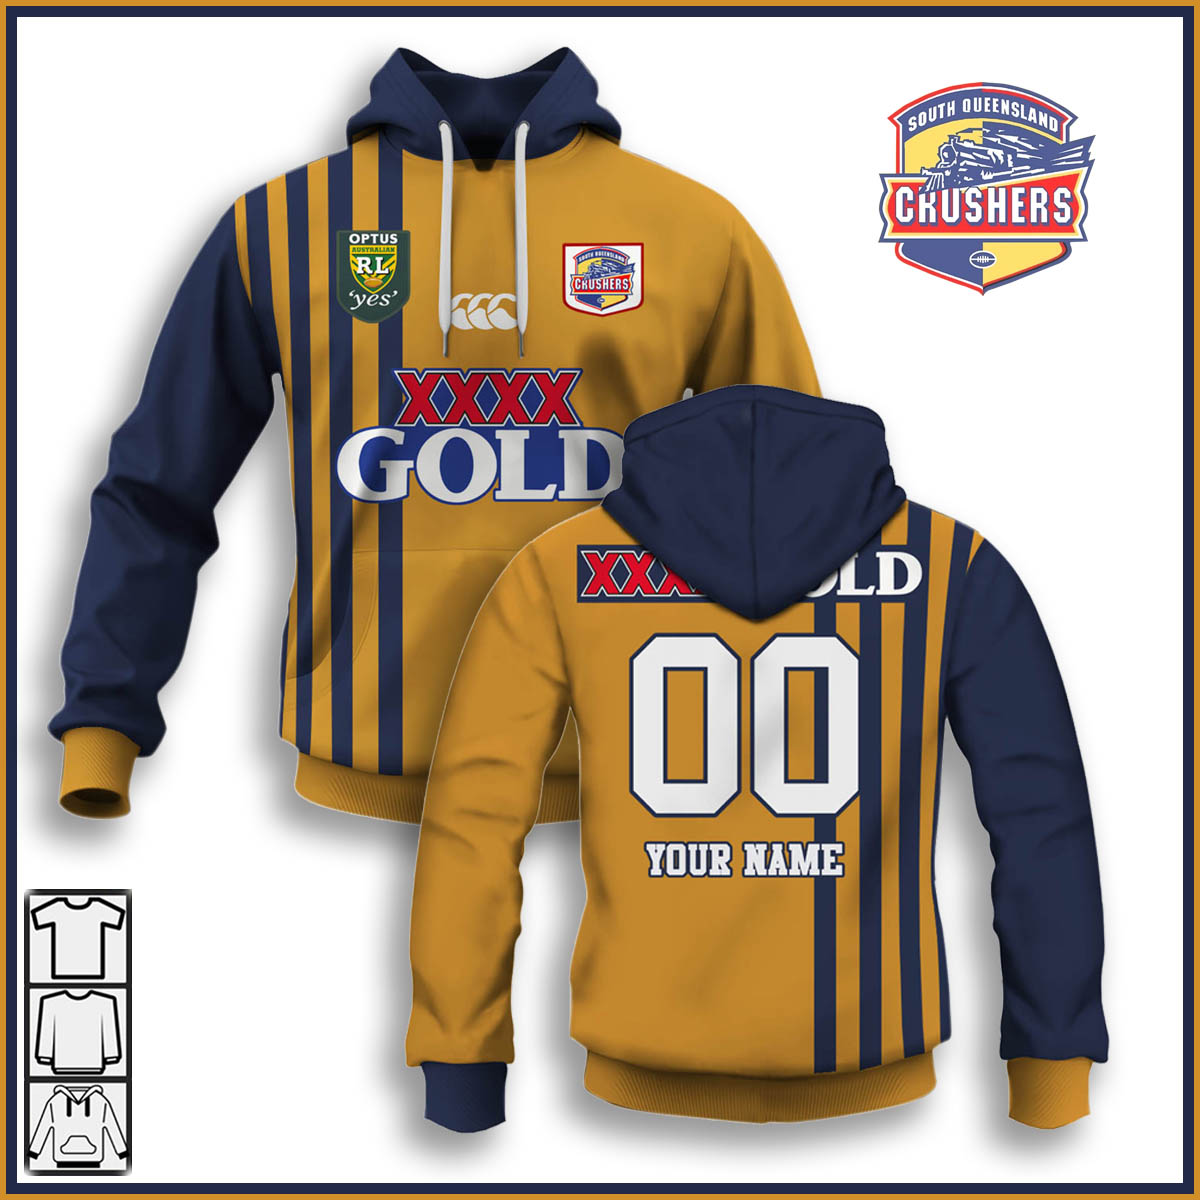 Personalized South Queensland Crushers Rugby League Jerseys Hoodies Shirts For Men Women